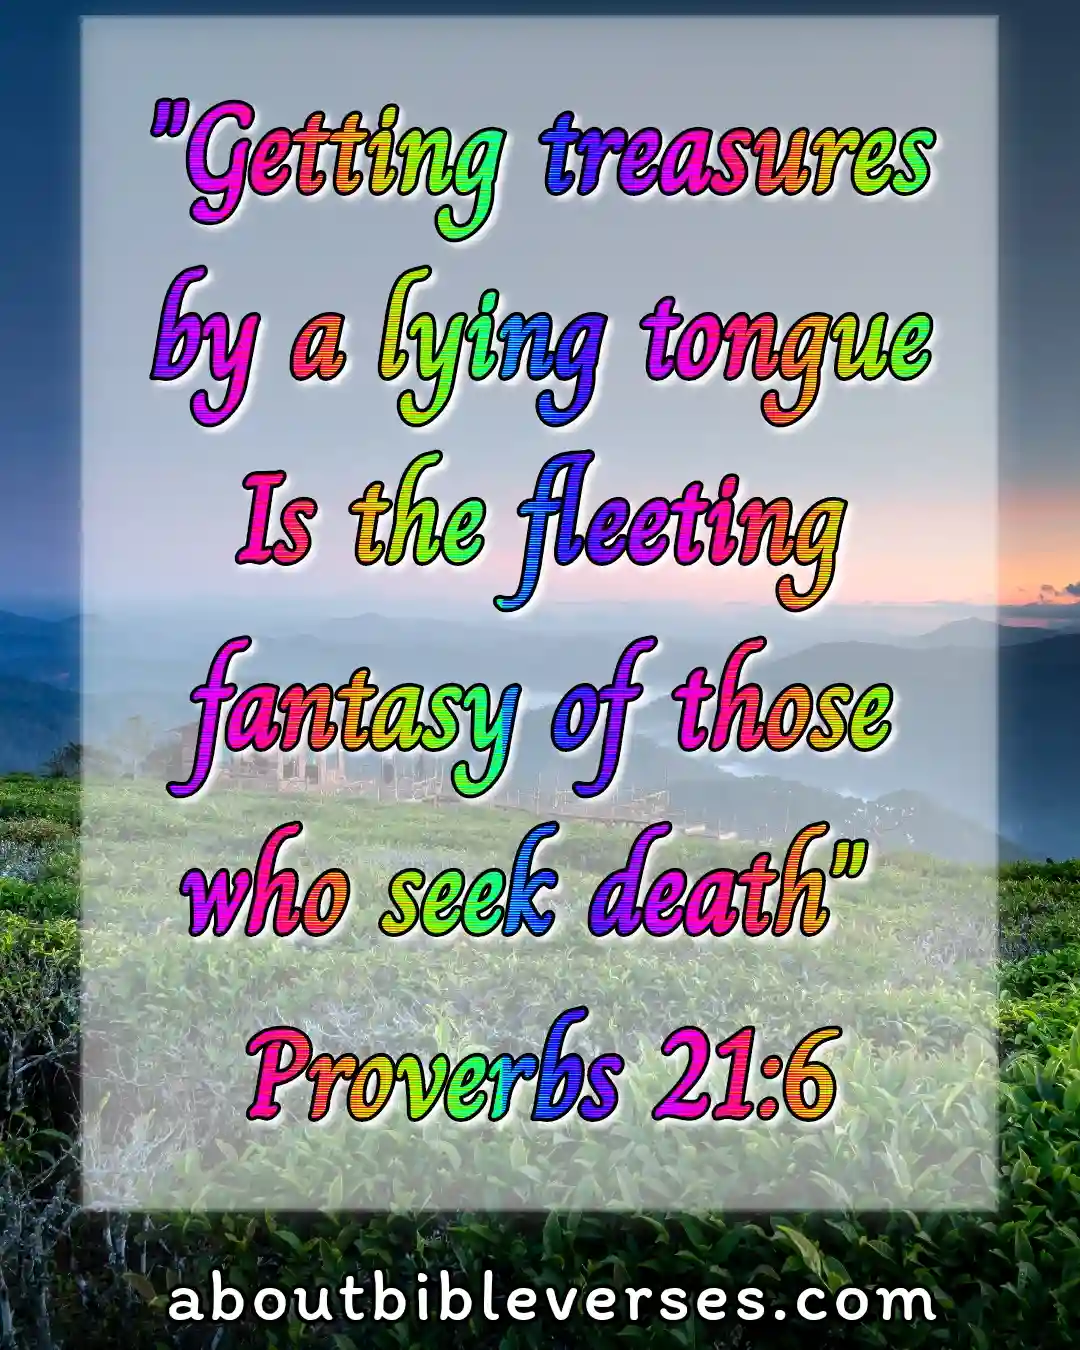 bible verses lying and deceit (Proverbs 21:6)